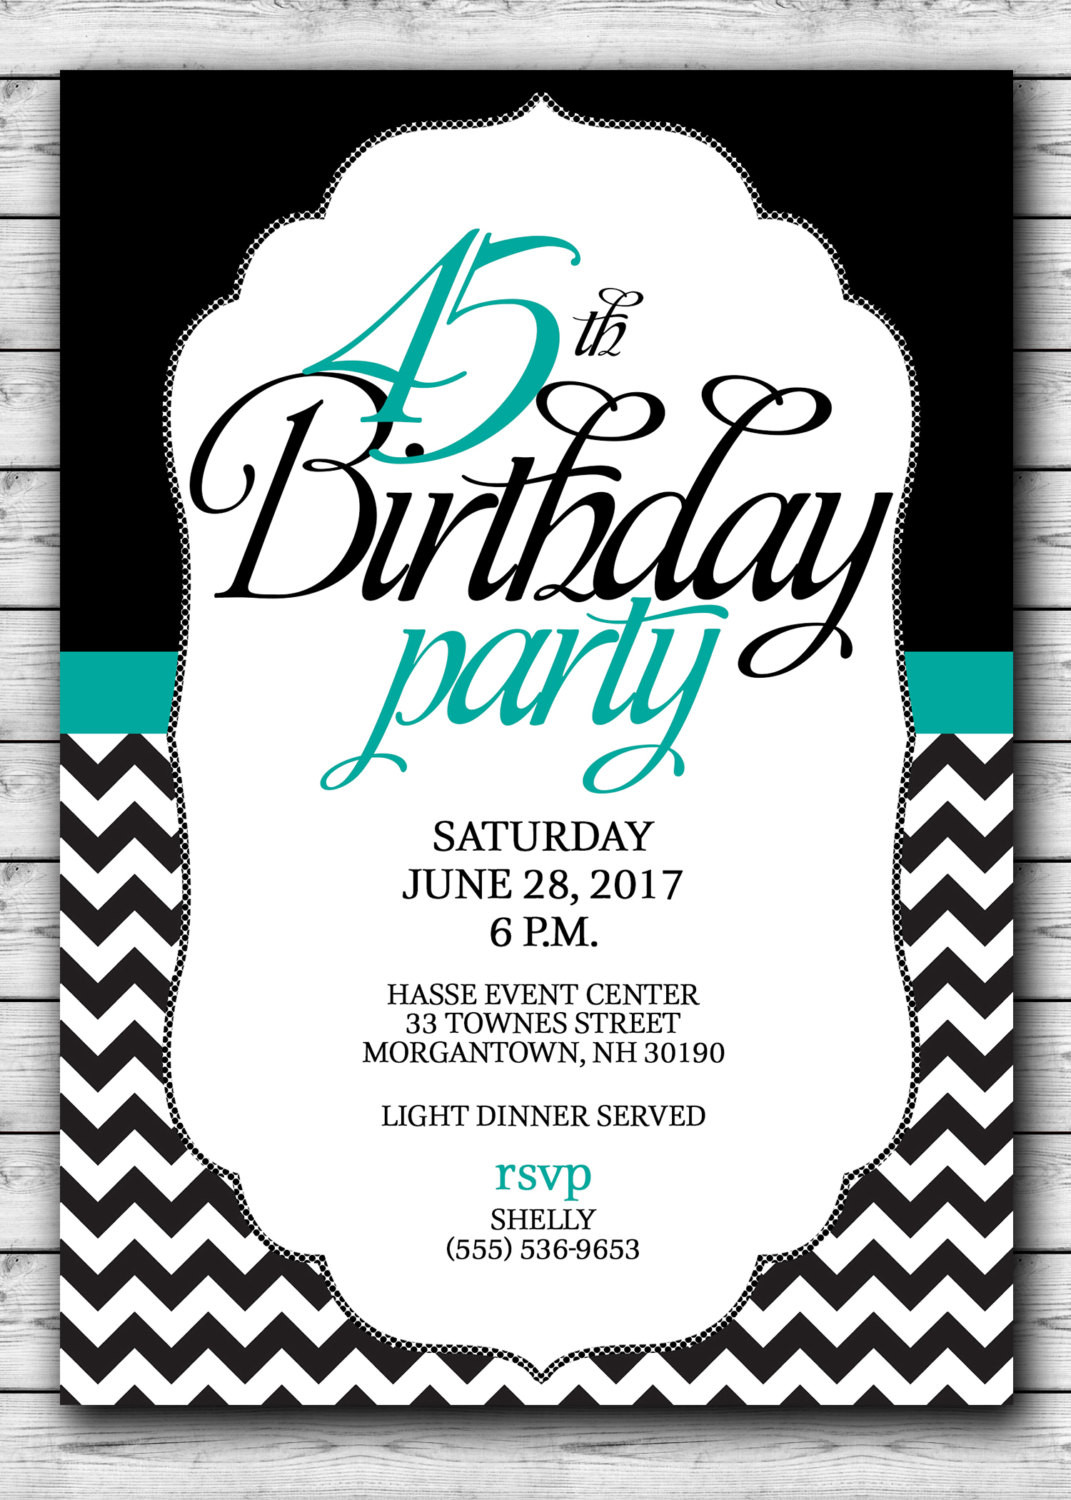 45th Birthday Party Ideas
 45th Birthday PARTY Invitation Black with a touch of teal or